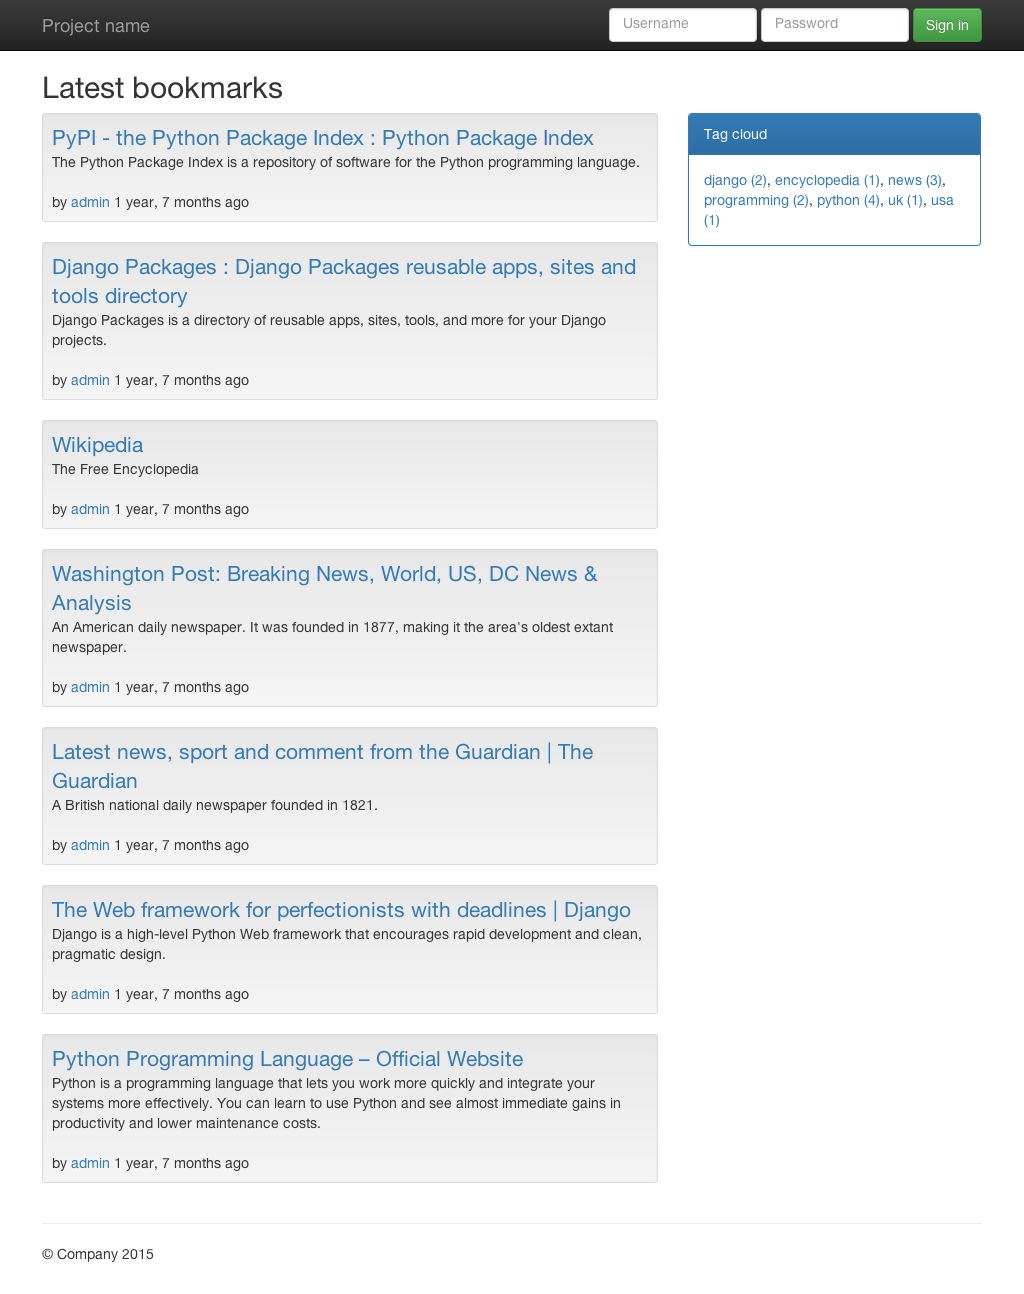 Frontend Bookmark List View with Tag Cloud